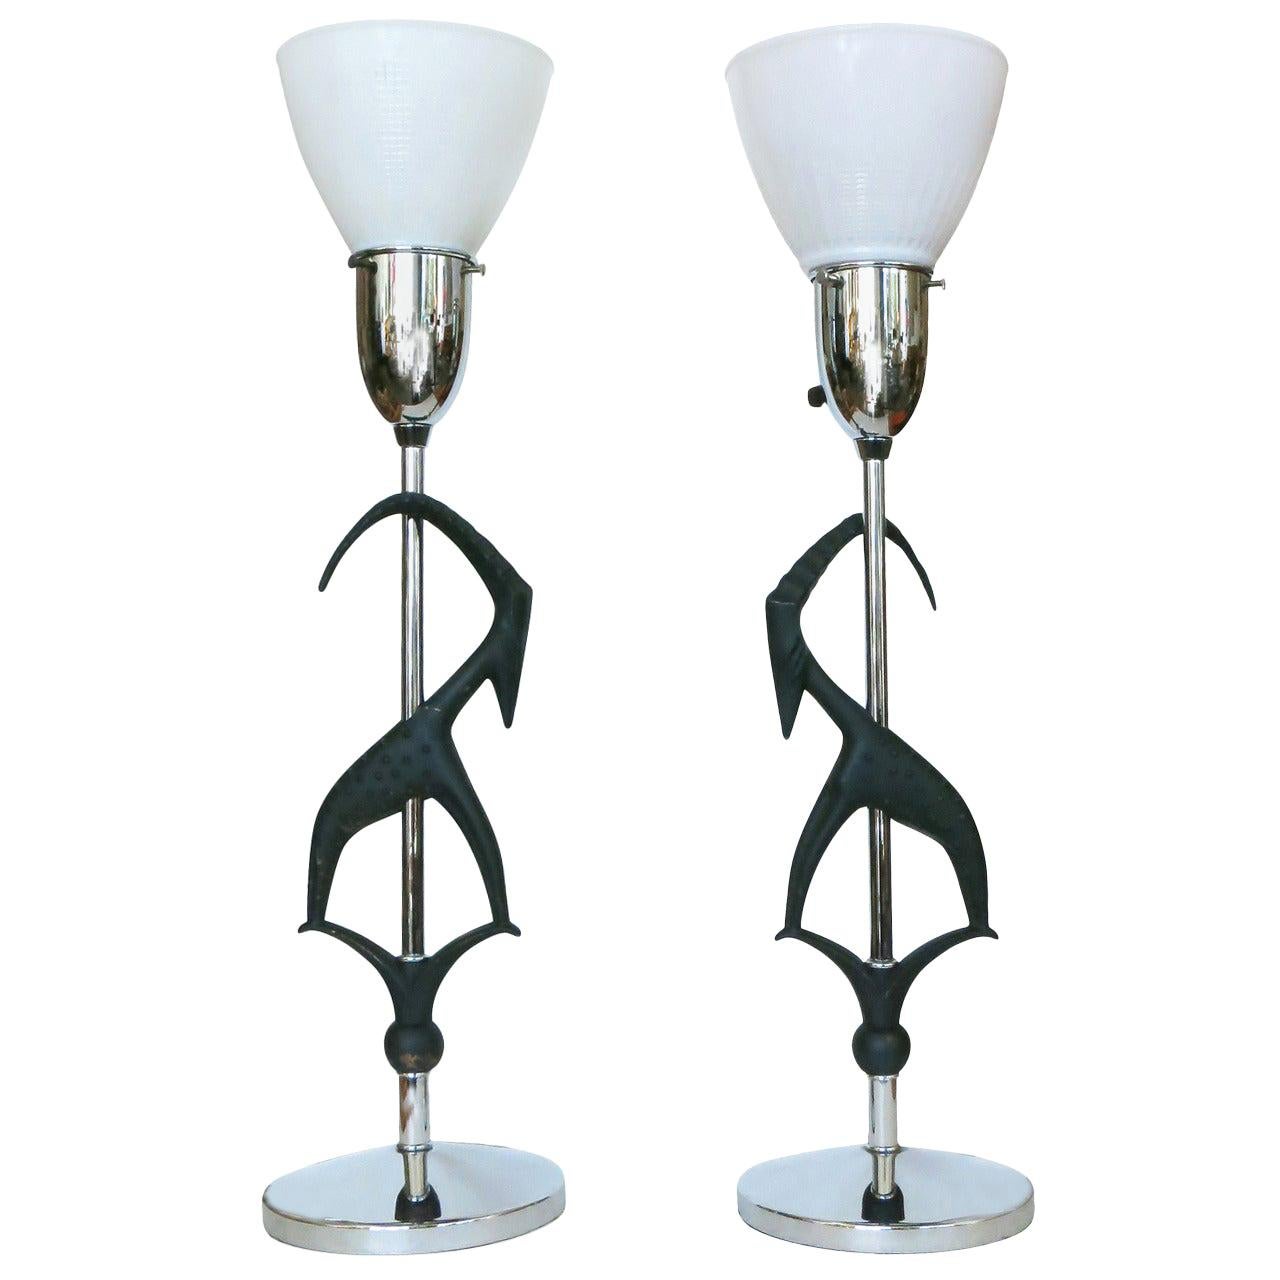 Midcentury Gazelle Table Lamps, Pair by Rembrandt